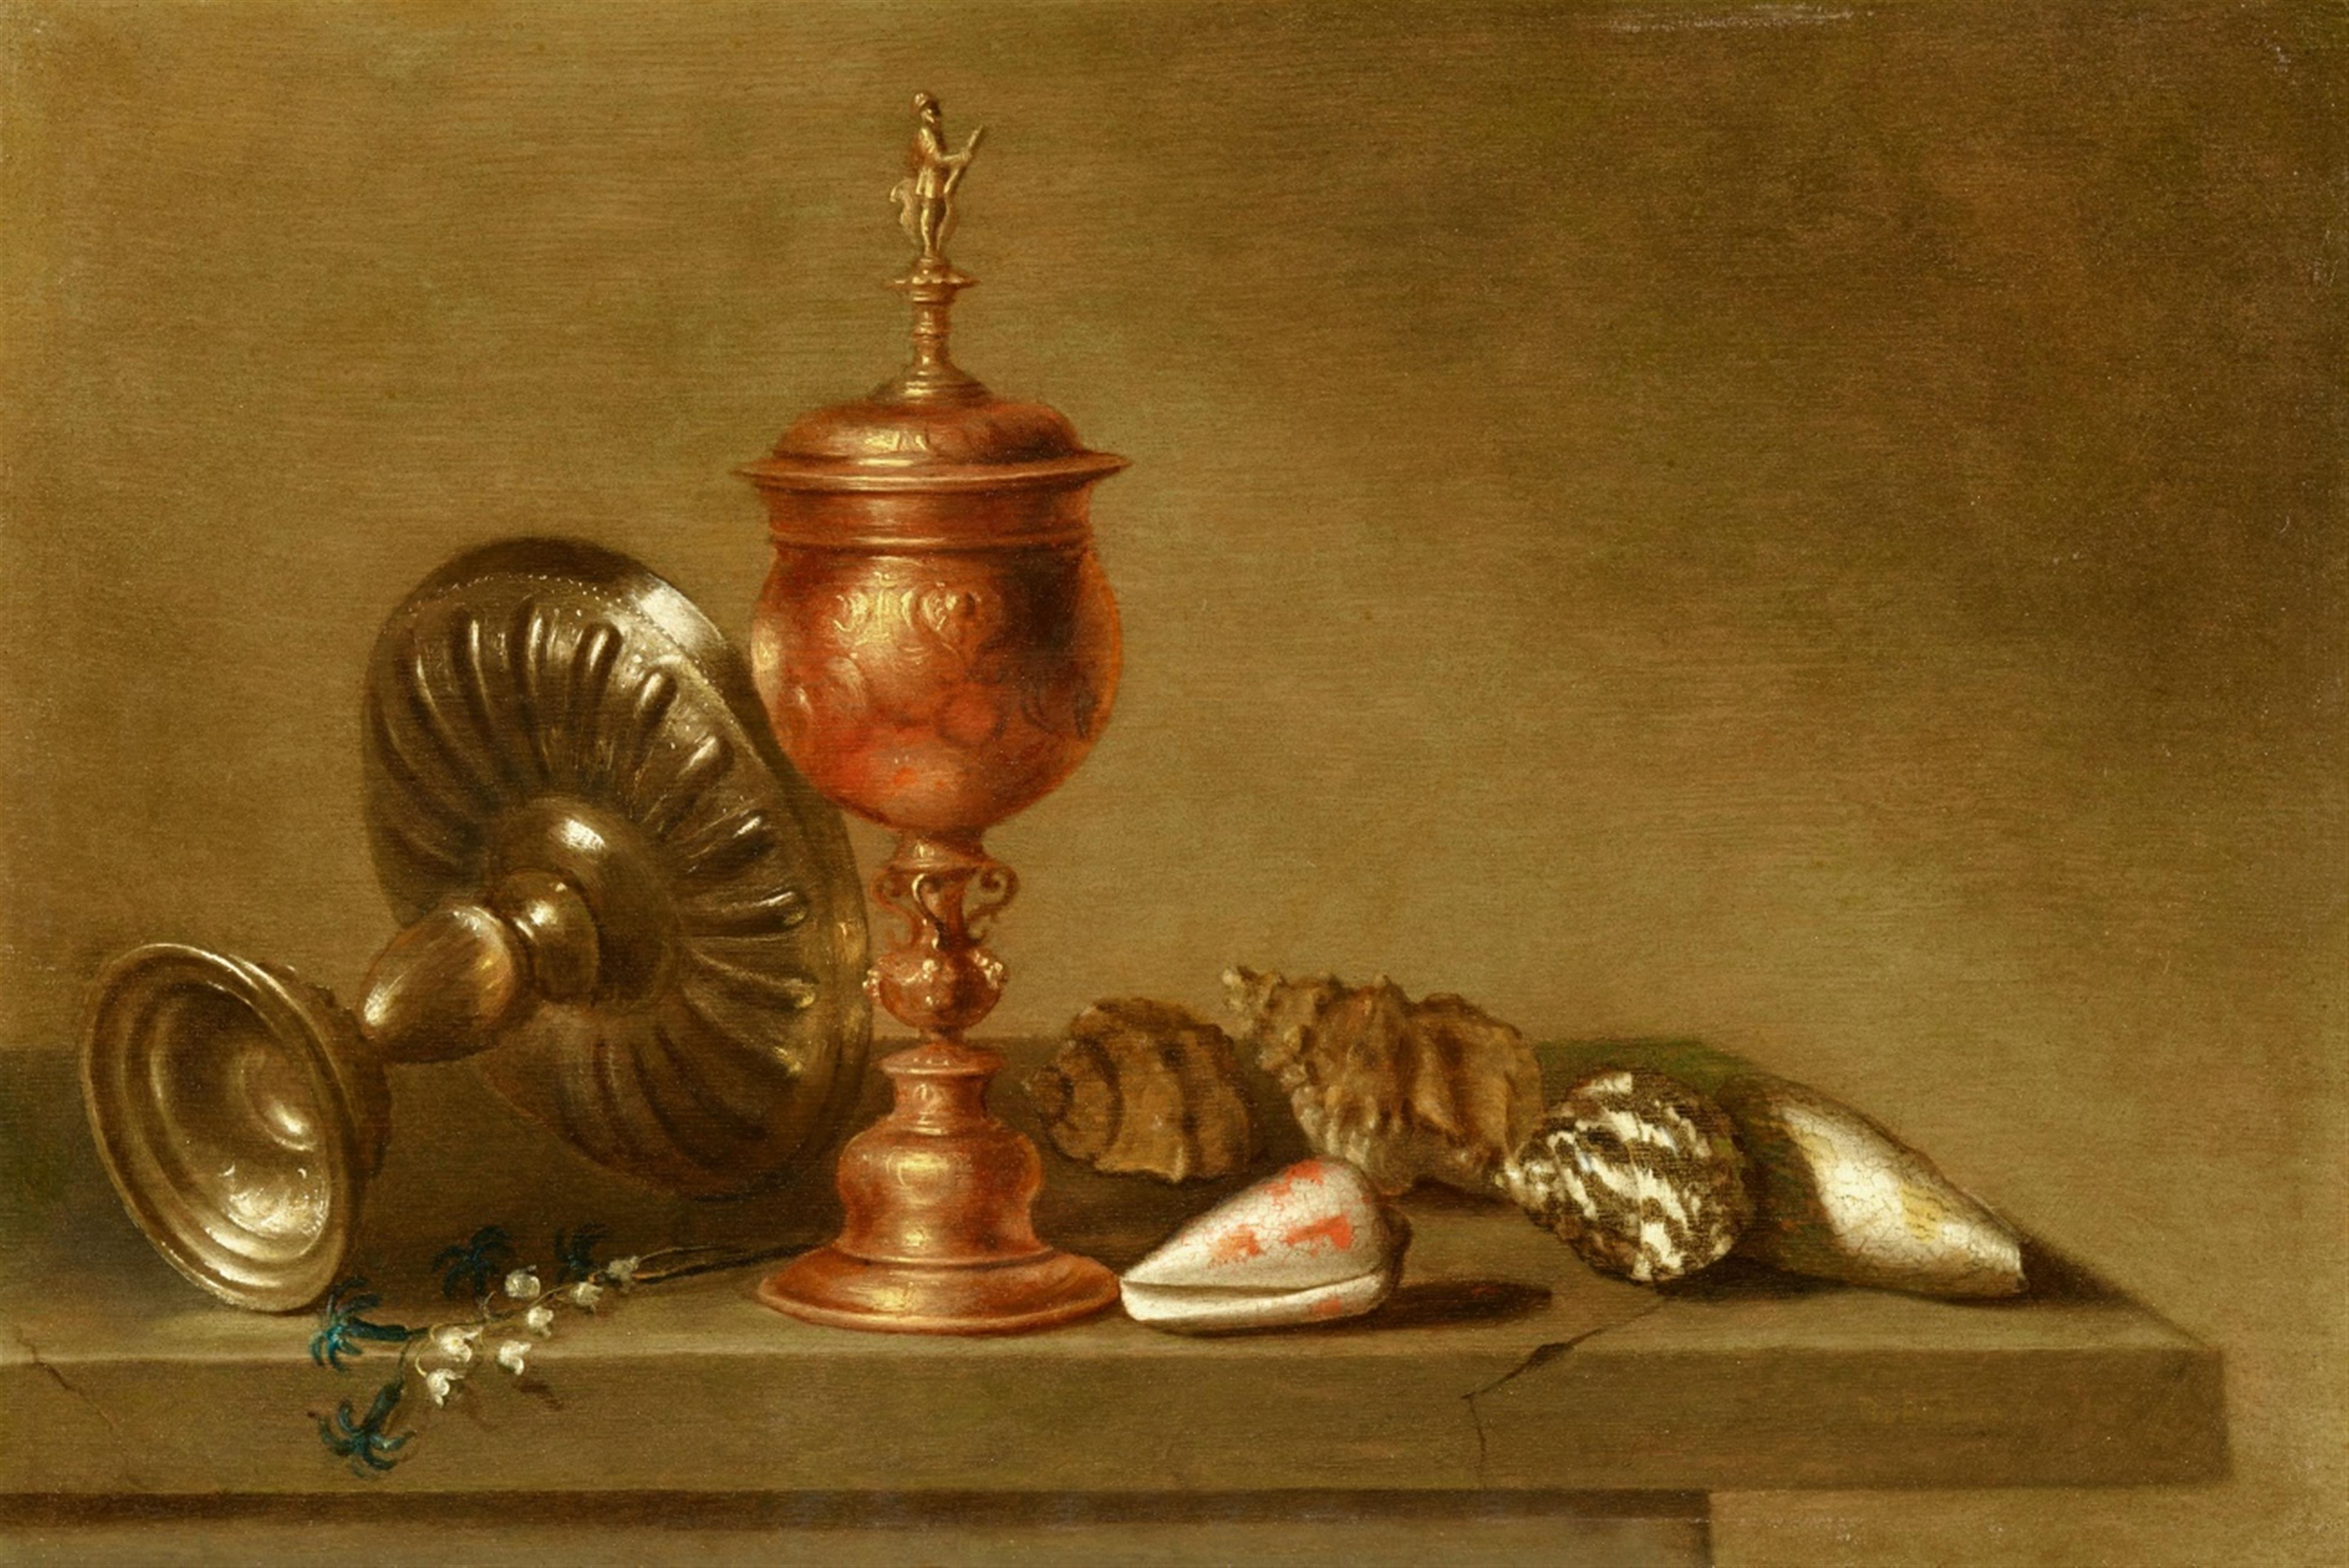 Maerten Boelema de Stomme - Vanitas Still Life with a Chalice, Tazza, and Shells - image-1